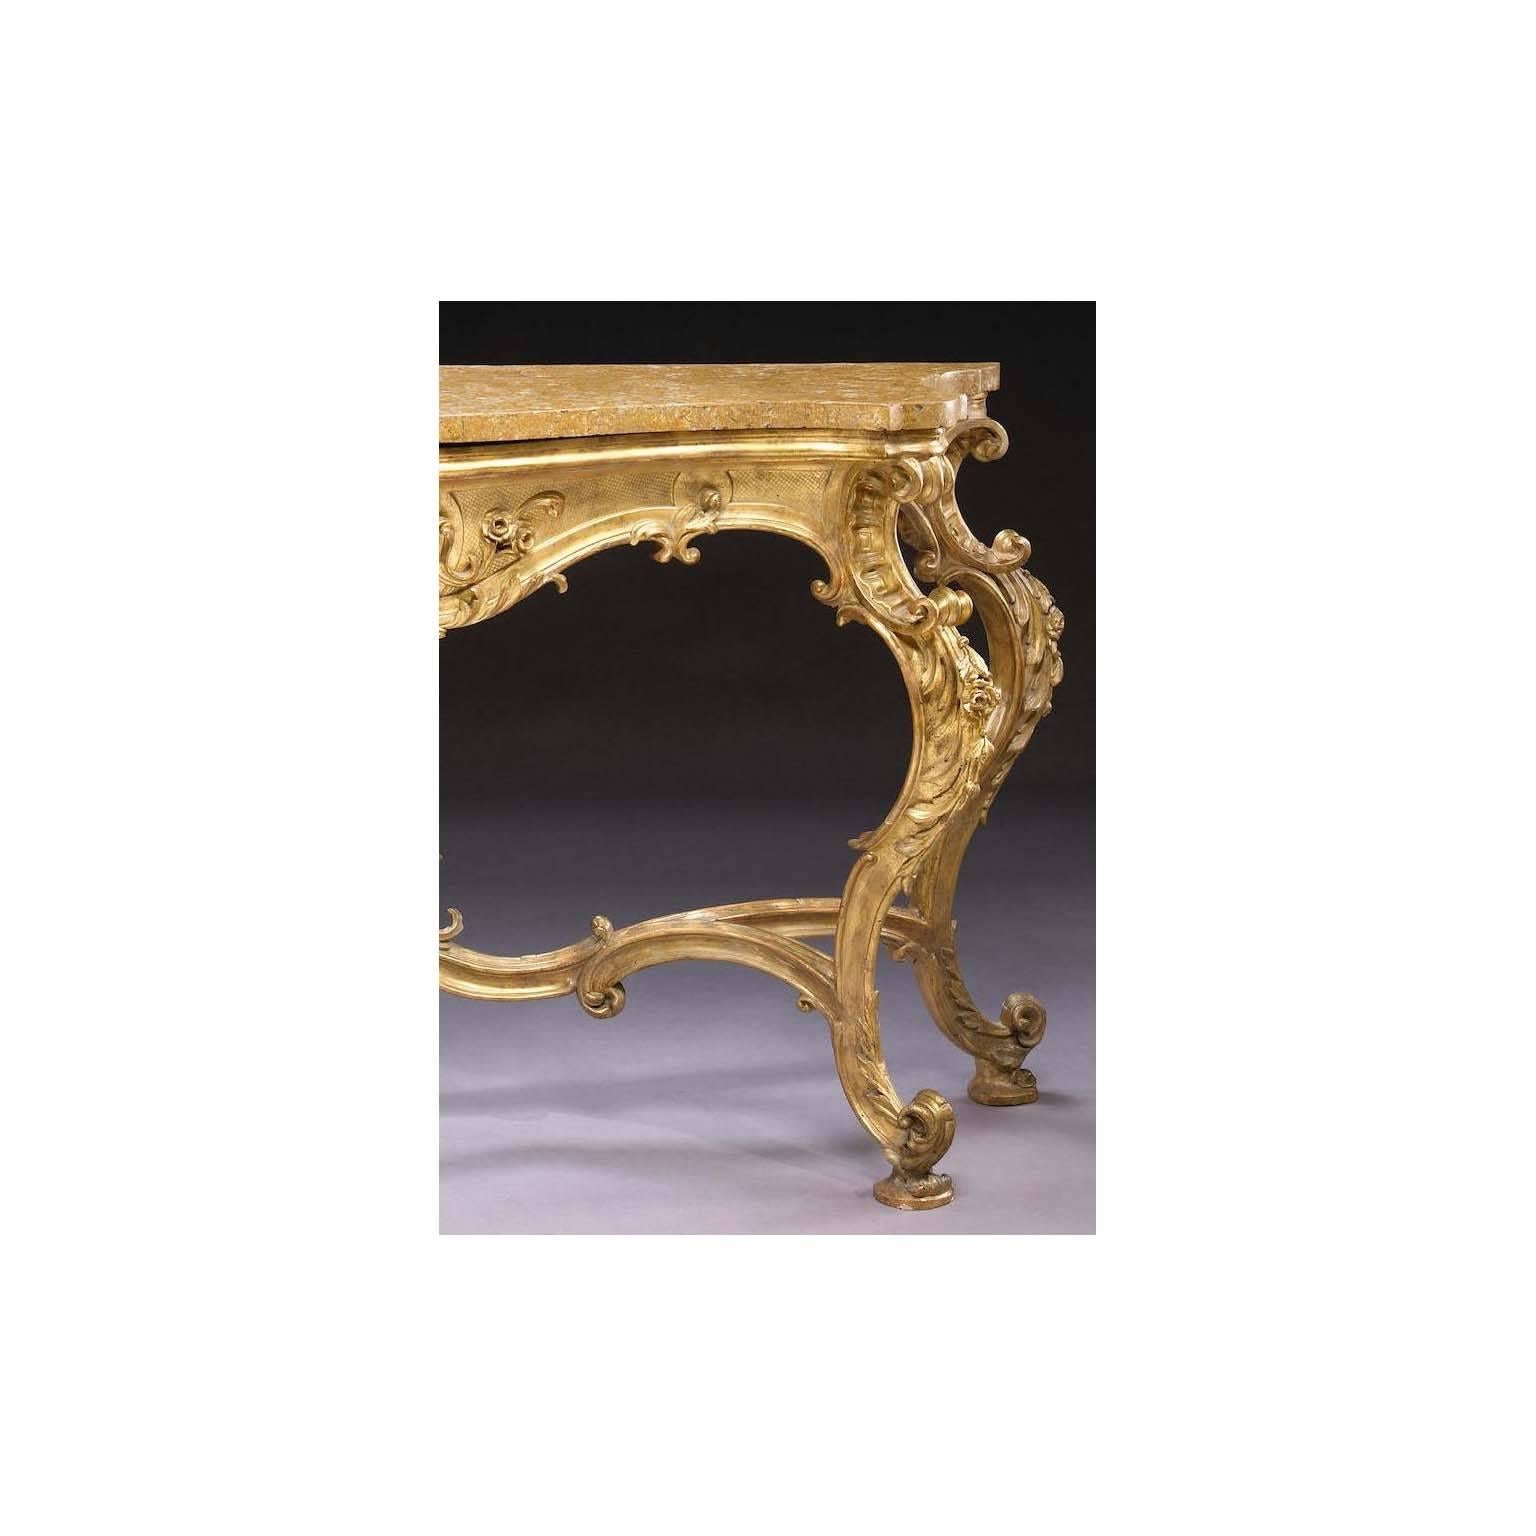 A very fine and palatial Italian 18th century Rococo style giltwood carved console table with a castracane marble top of serpentine outline, the frieze with a pierced cartouche decorated with flowers and foliate, raised on cabriolet legs with